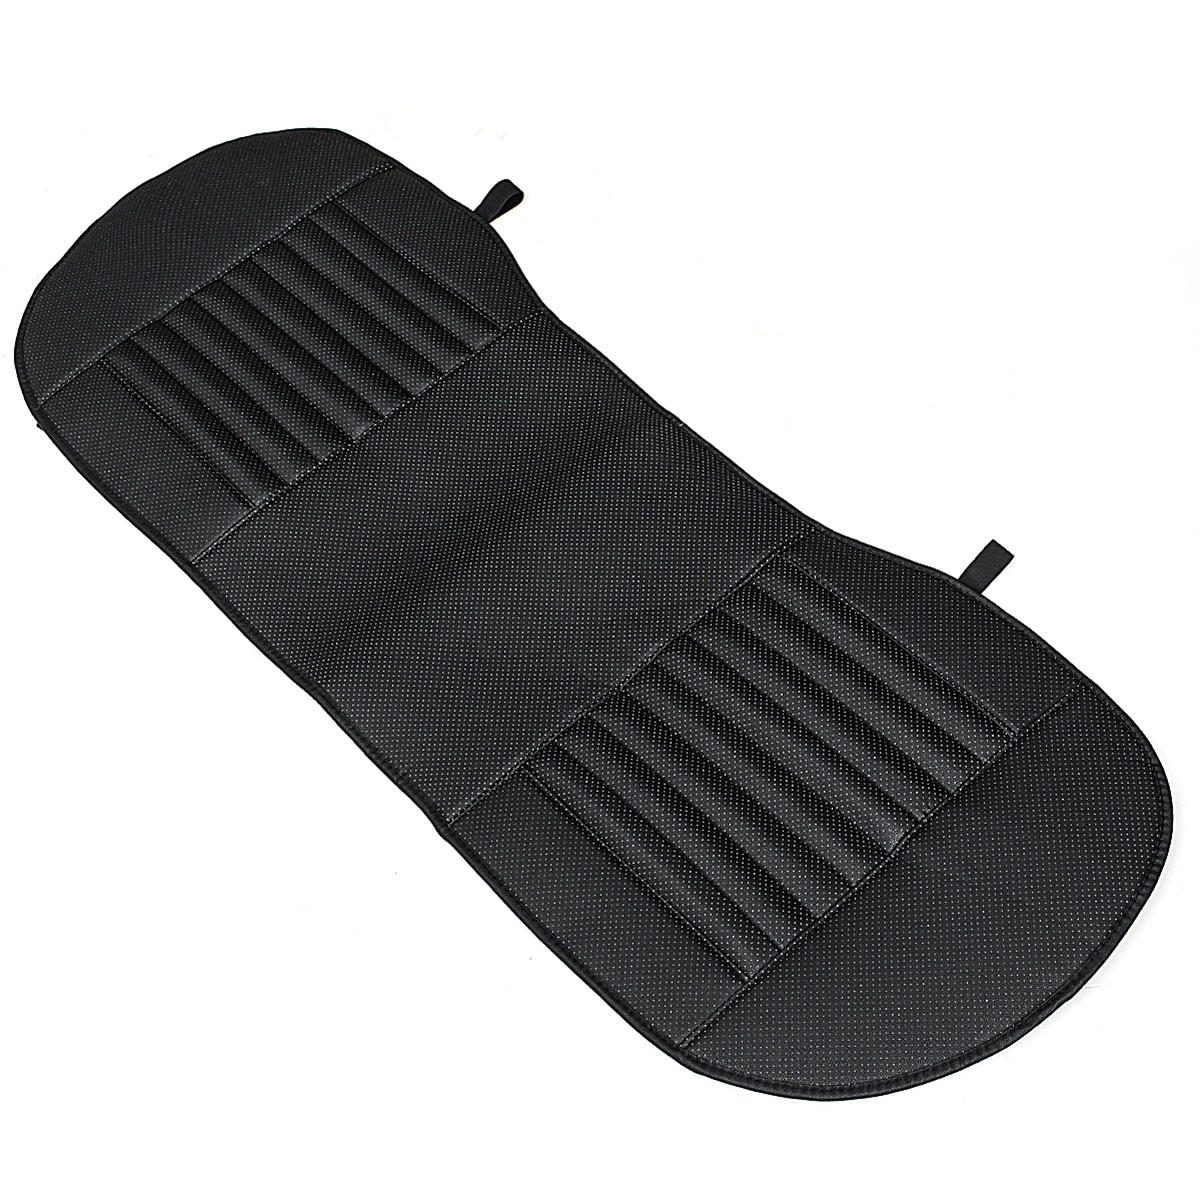 PU Leather Car Rear Seat Covers Universal Protector